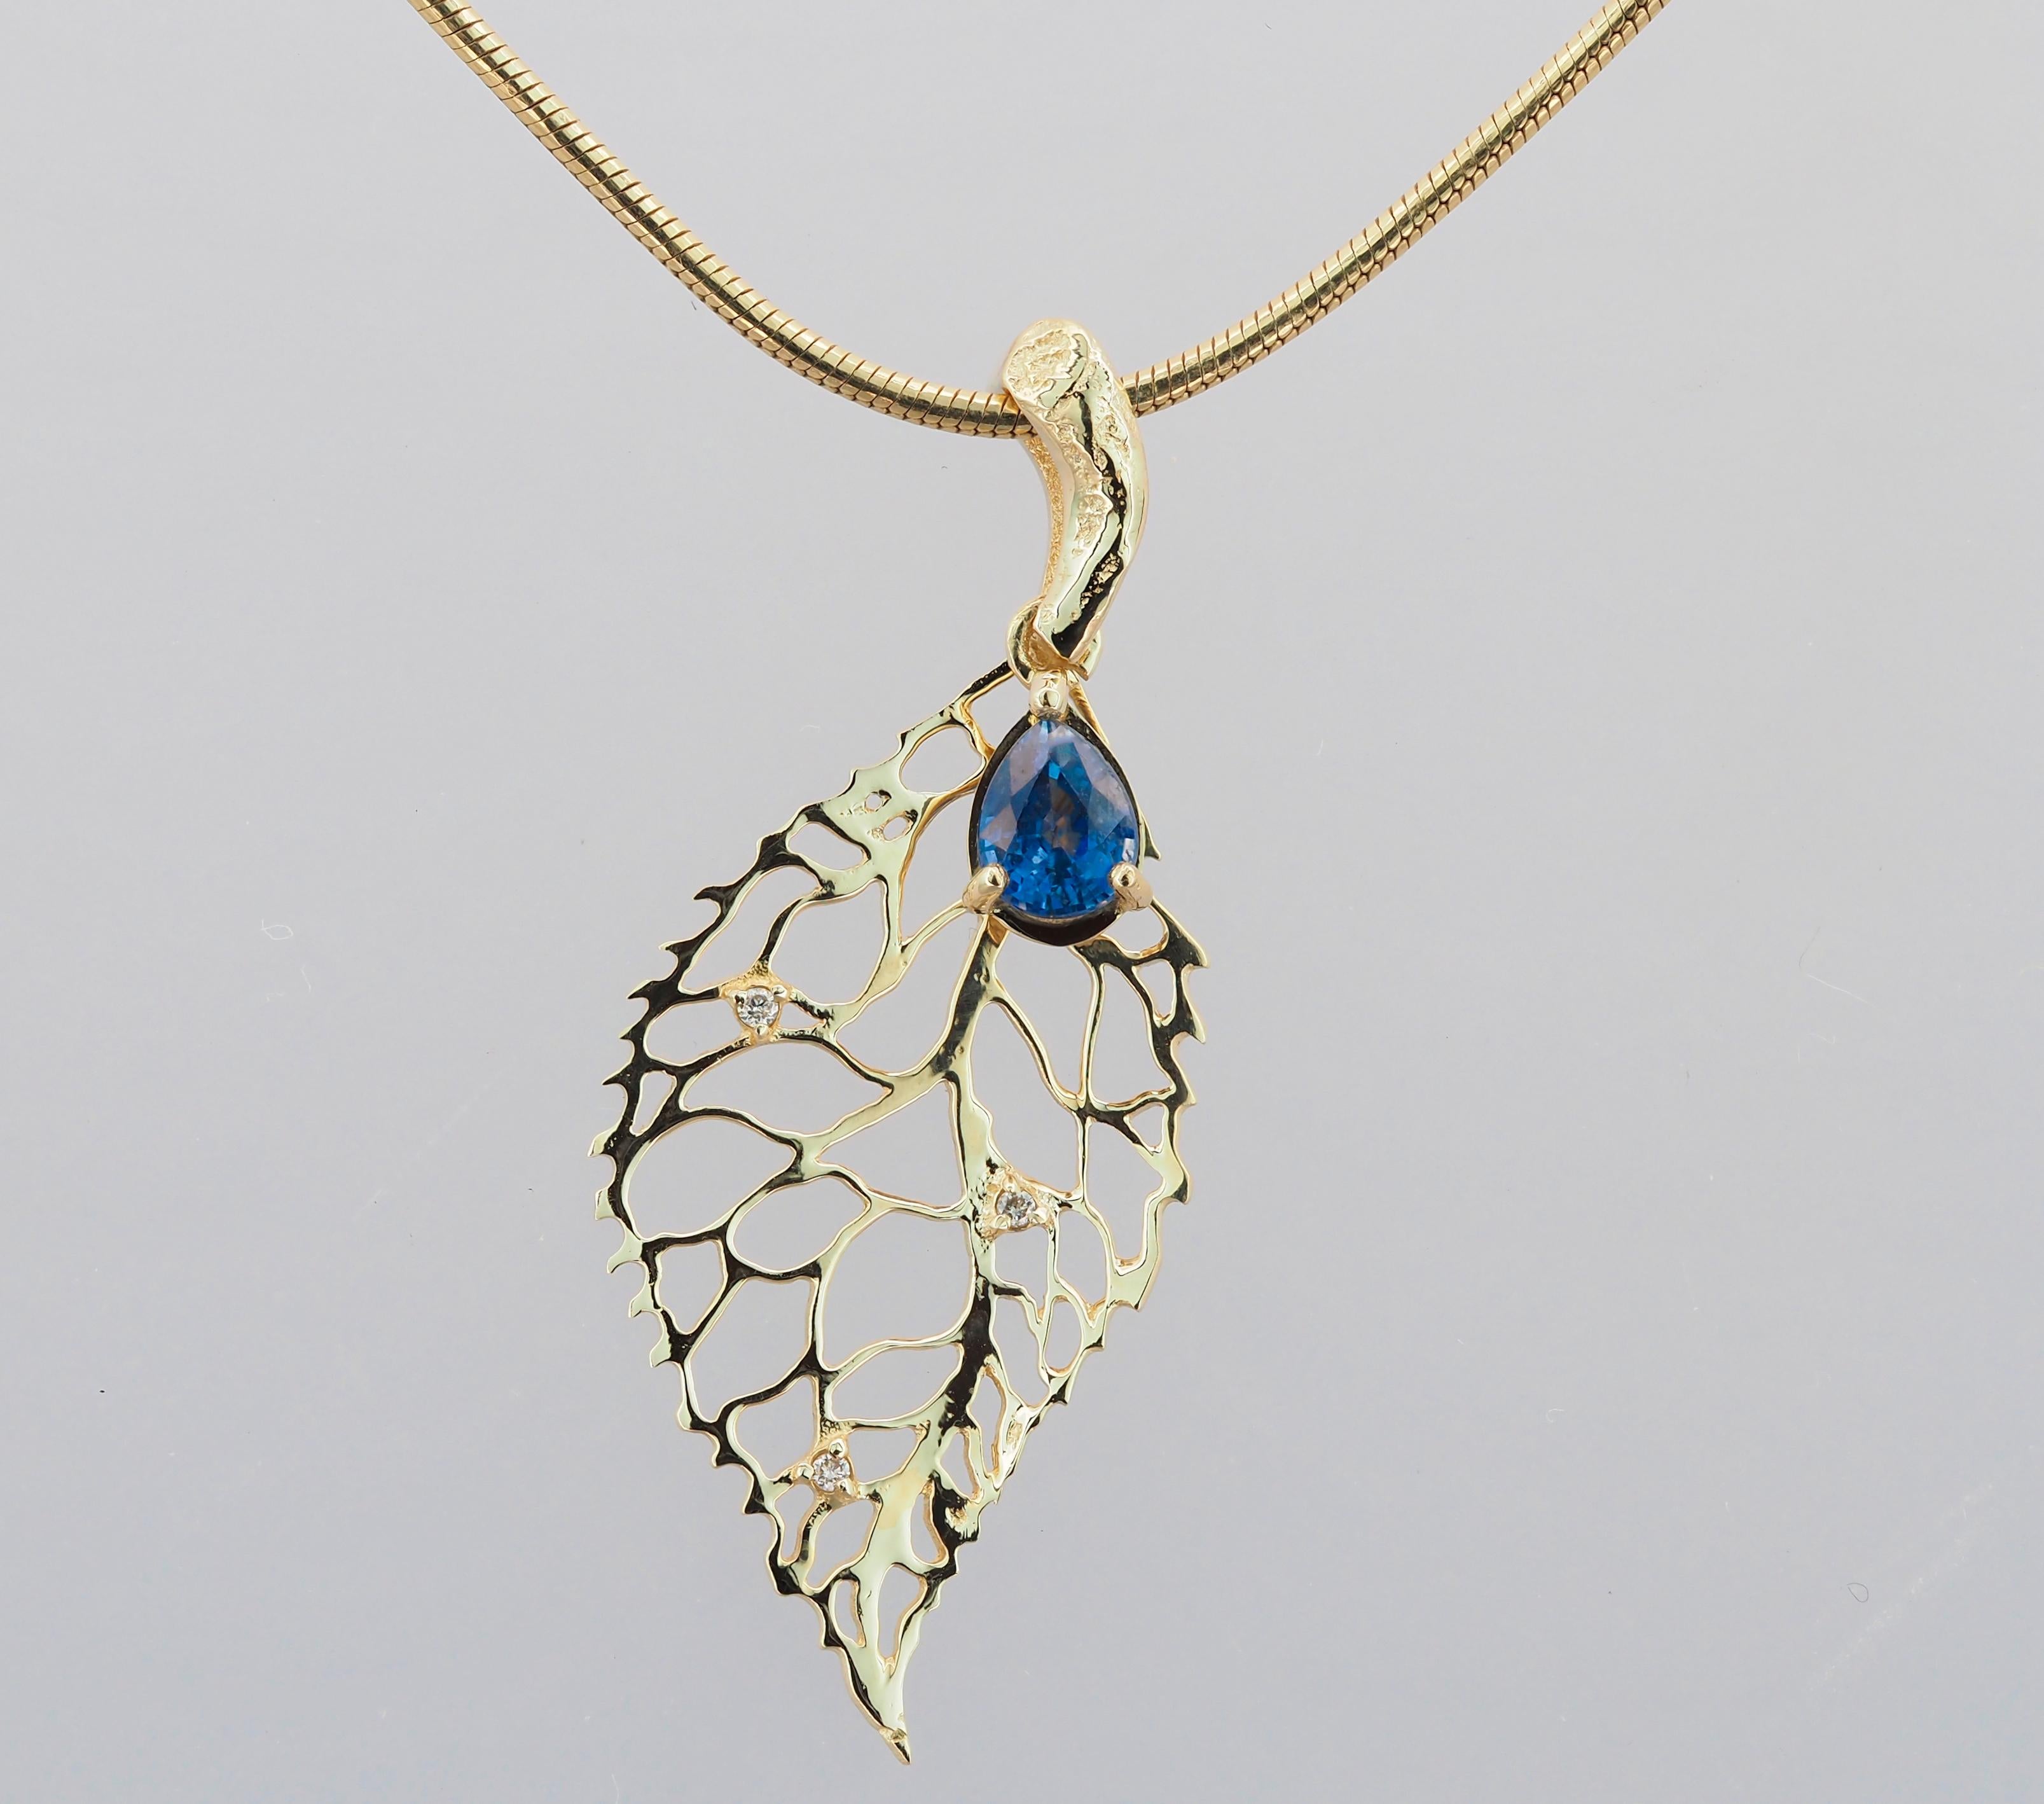 14k Gold Pendant with Sapphire and Diamonds, Gold Leaf Pendant For Sale 1